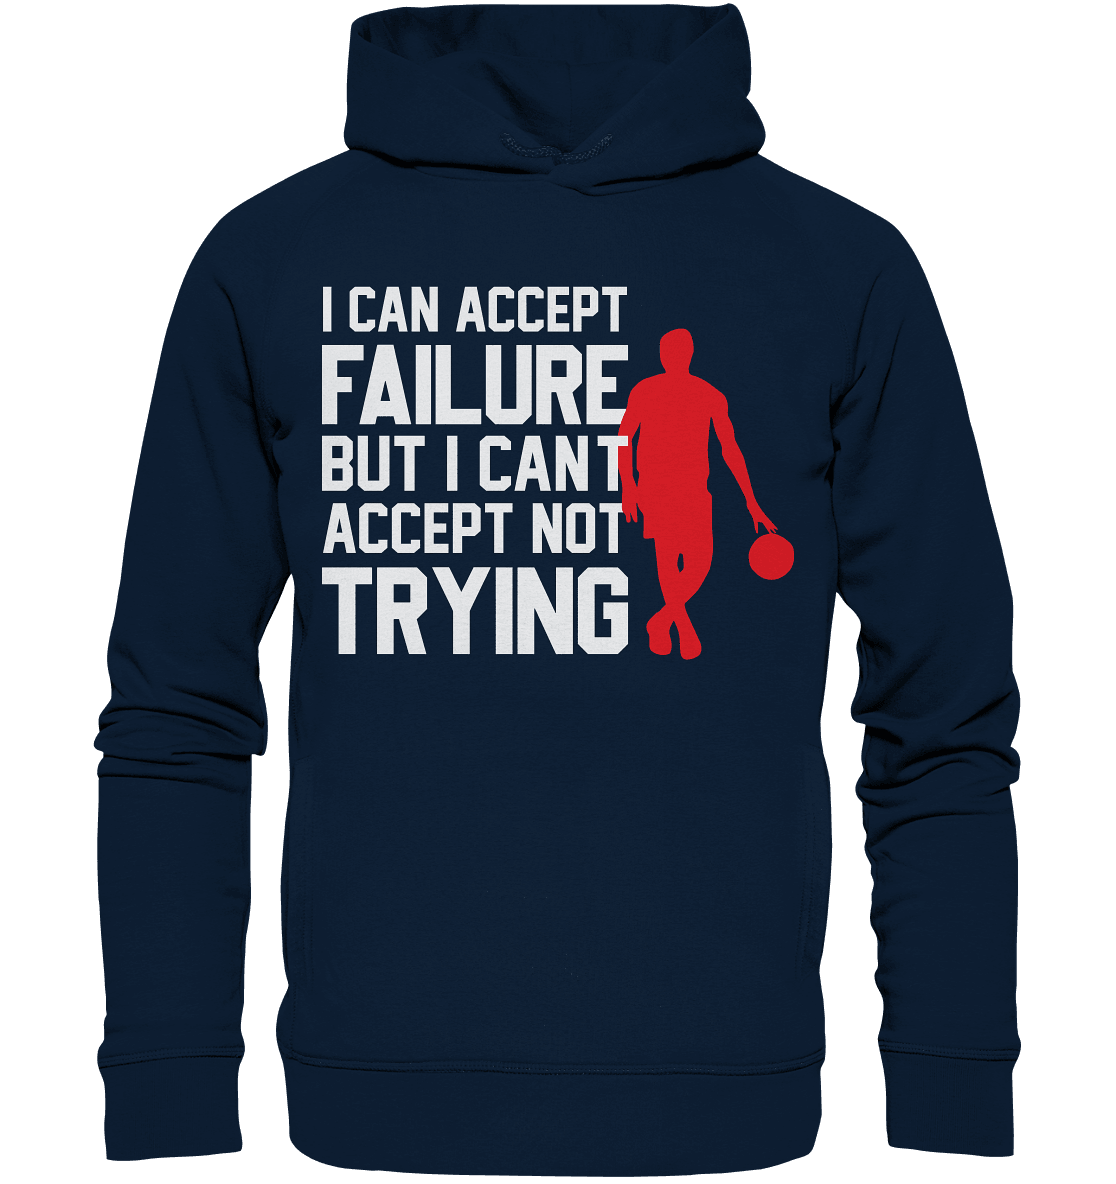 FAILURE & TRYING